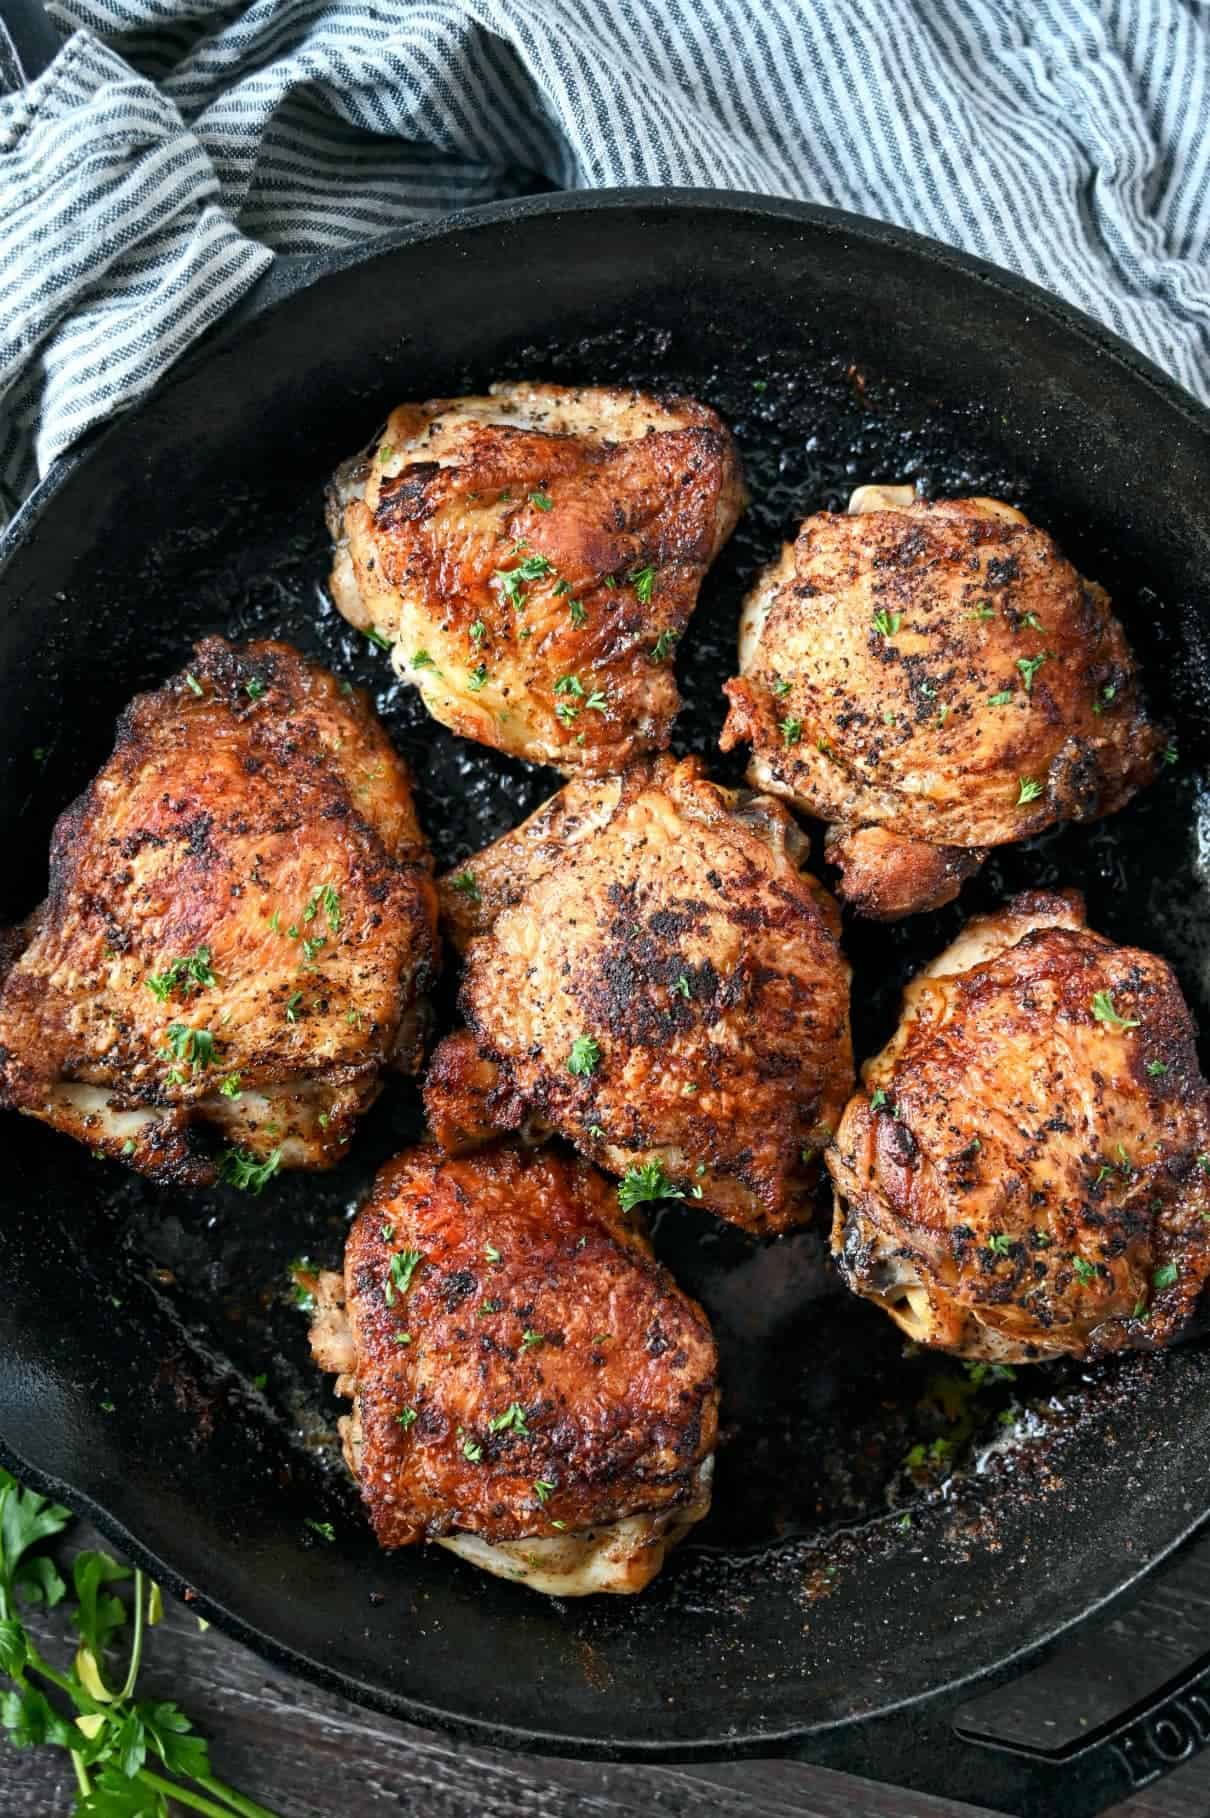 Six chicken thighs in a cast iron skillet.